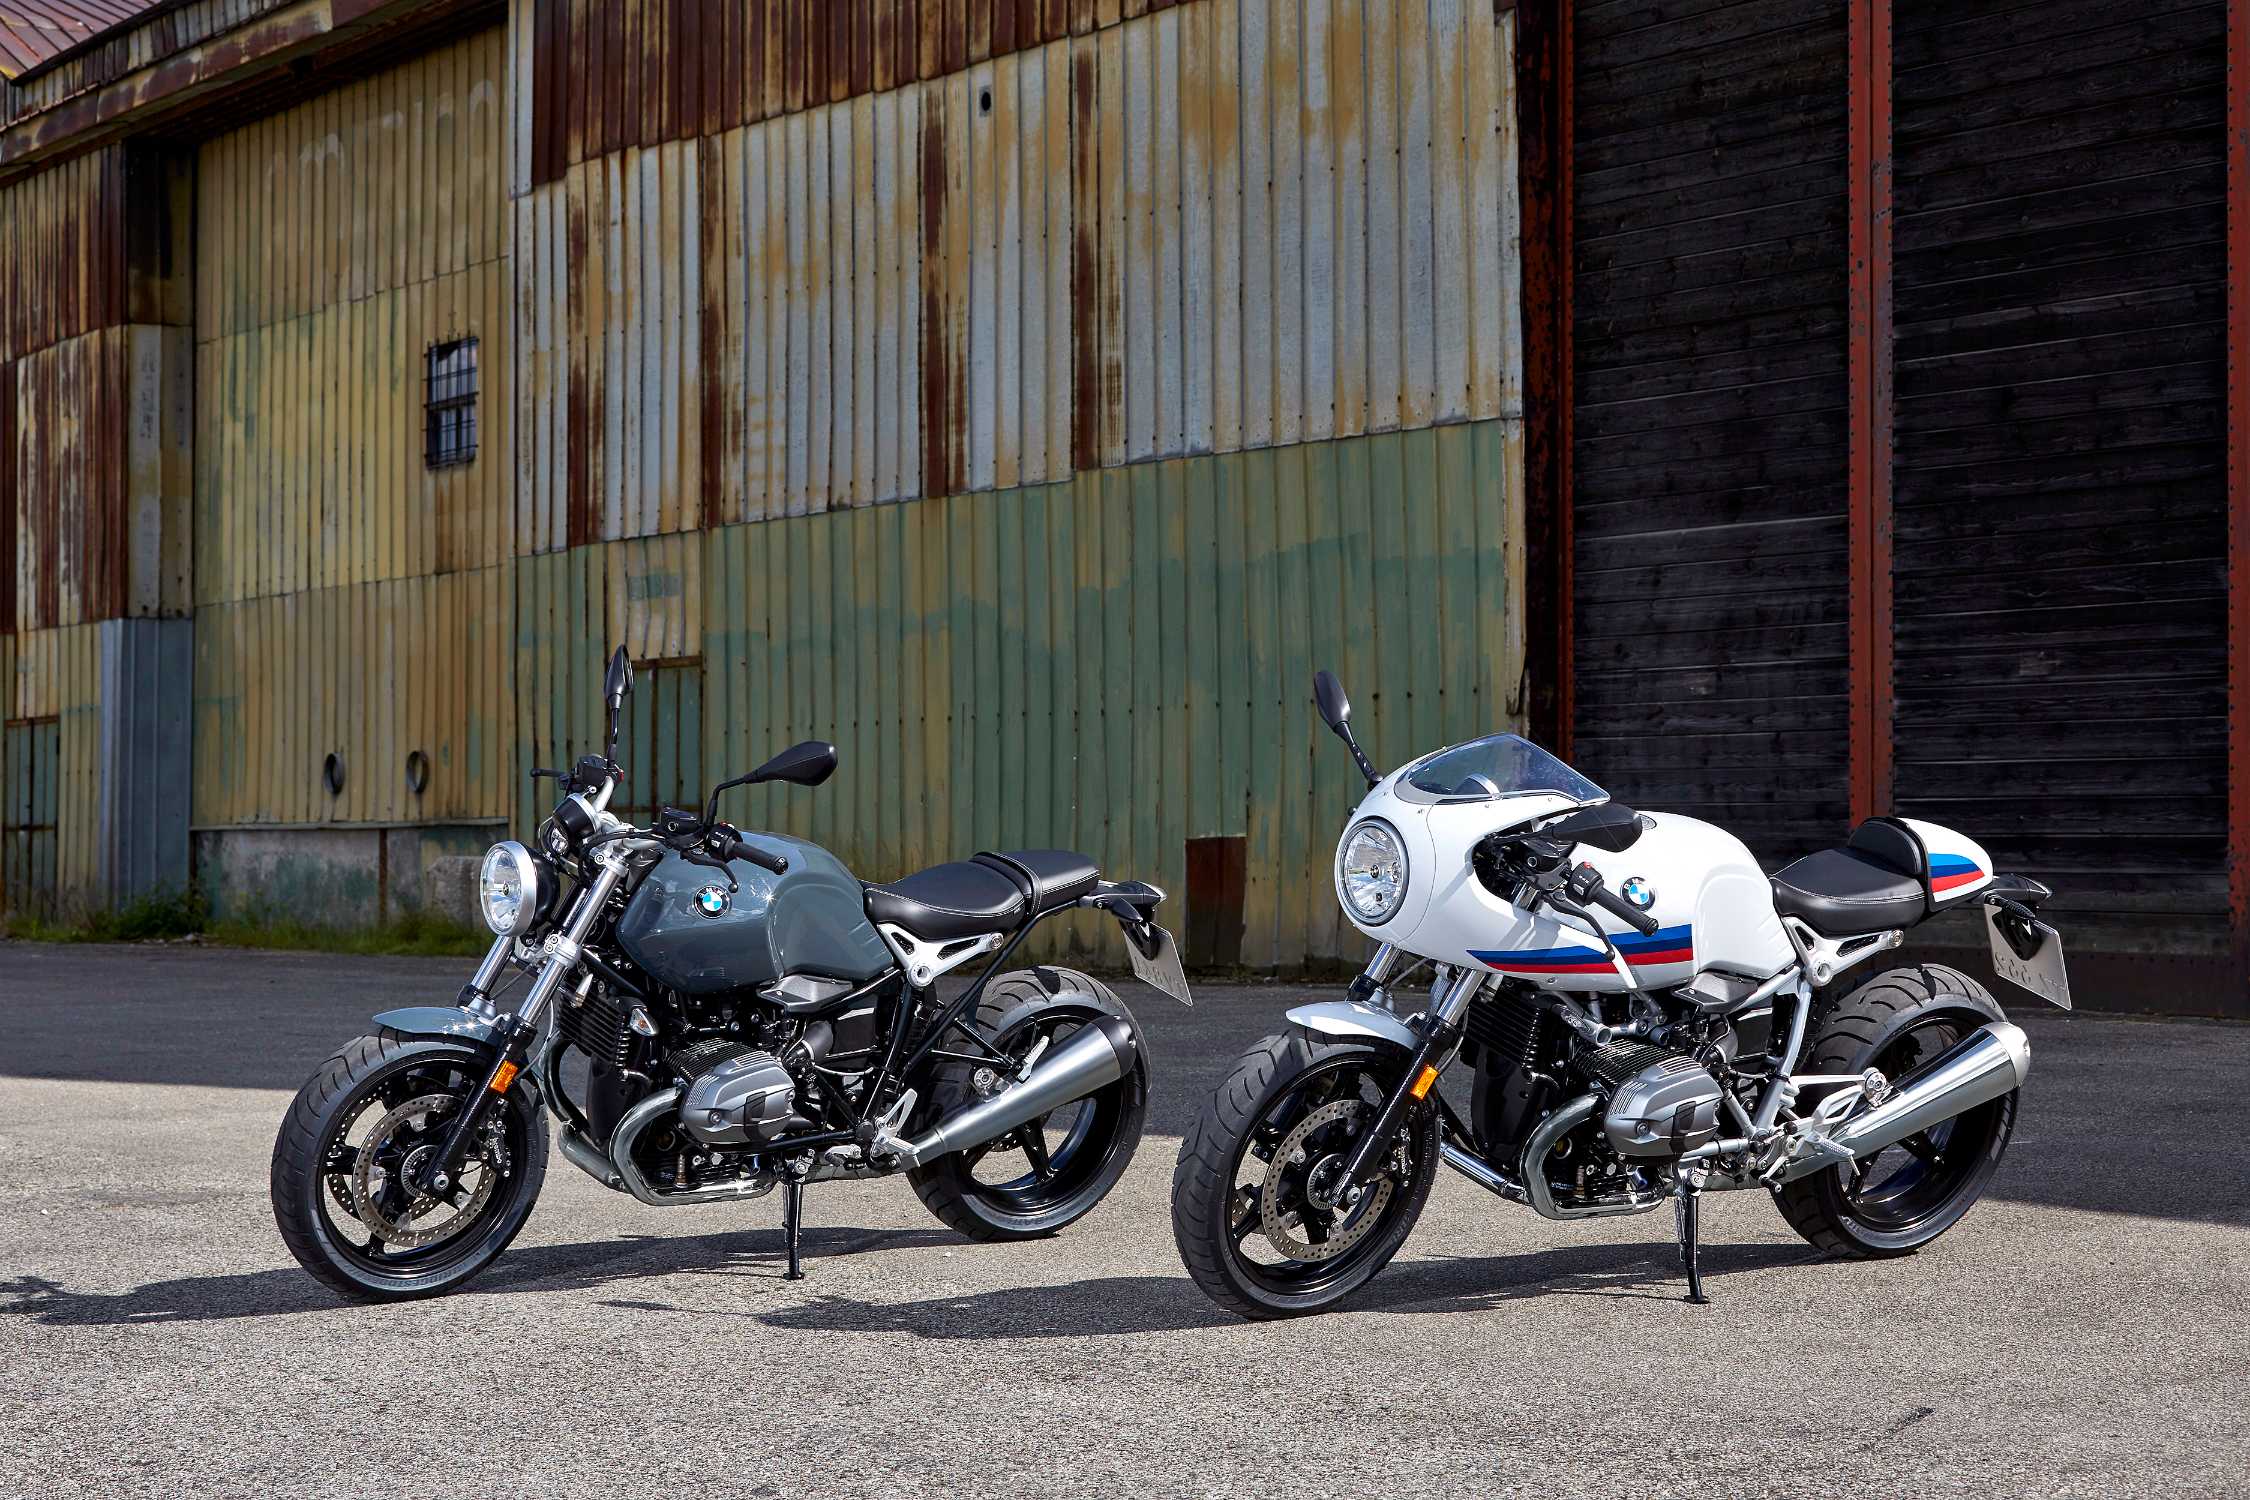 Bmw Motorrad Announces The Prices For The New R Ninet Pure And R Ninet Racer R Ninet Pure Purist Roadster For Entry Into The Bmw Motorrad Heritage World Of Experience R